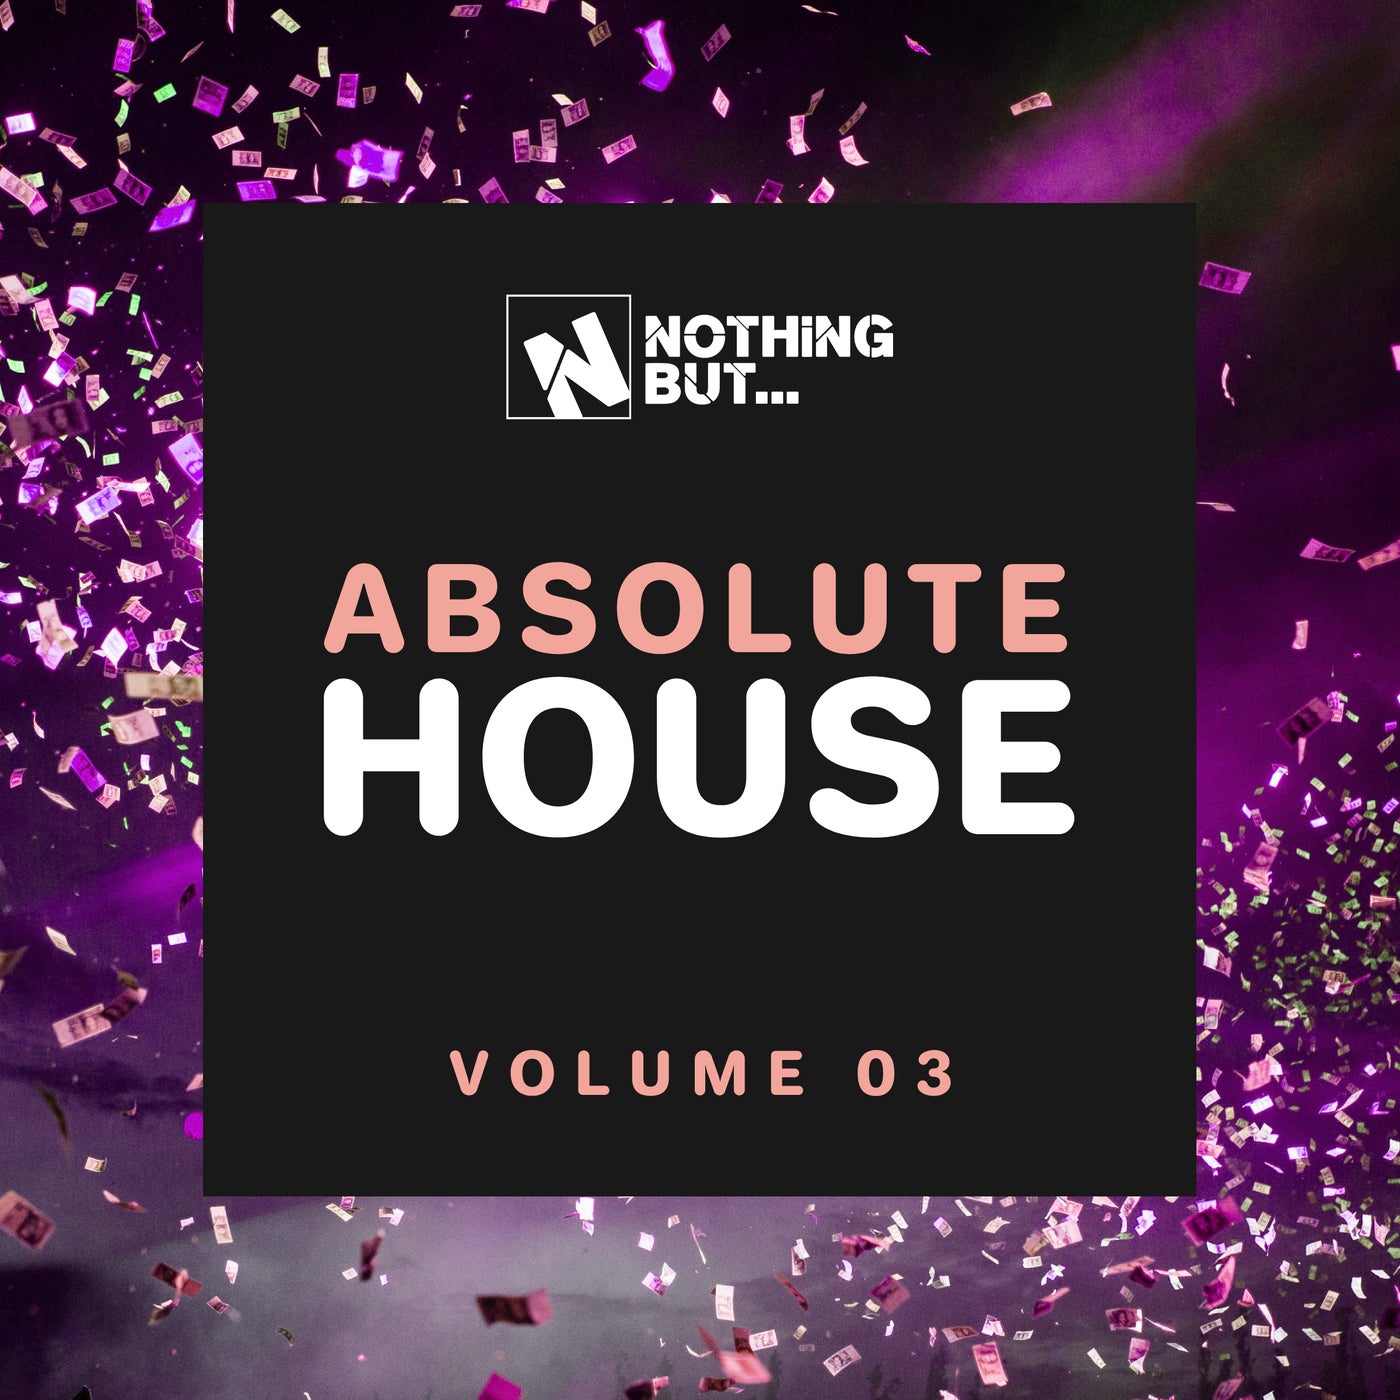 VA – Nothing But… Absolute House, Vol. 03 [NBABHS03]